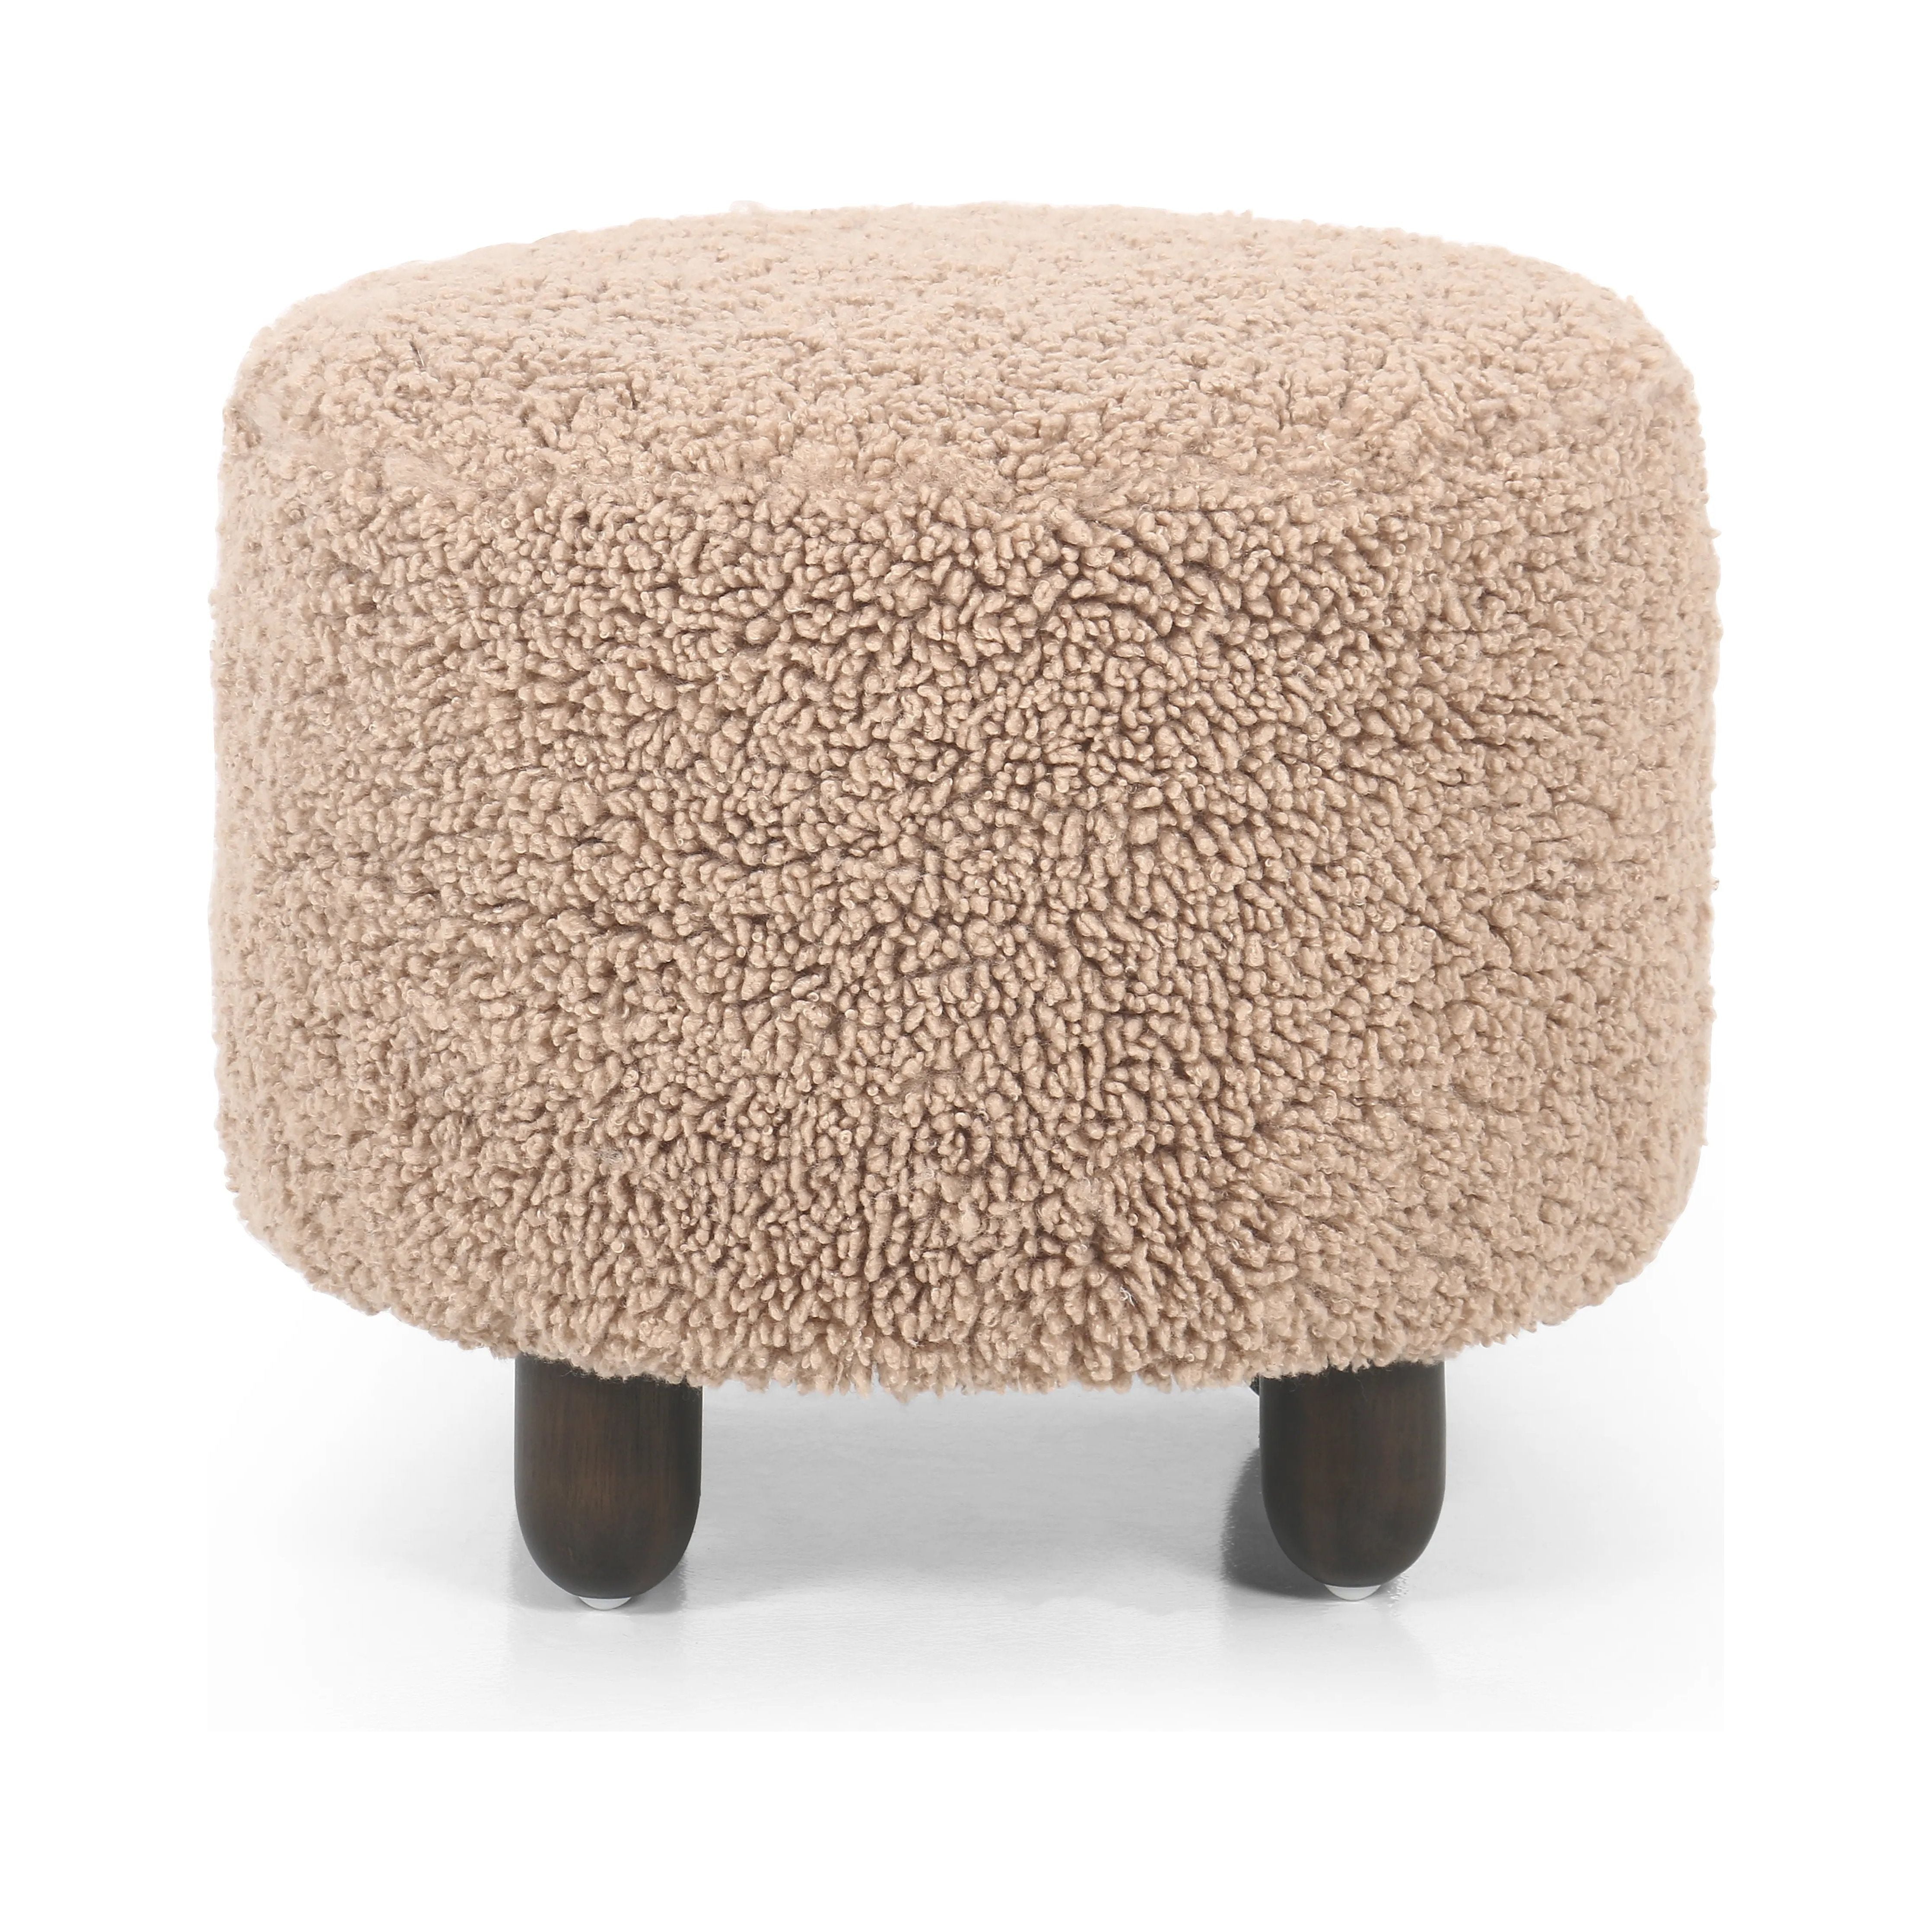 Place this round ottoman just about anywhere. Upholstered in a faux Mongolian shearling with a high pile fur in a toasty tan neutral hue. Burnt birch parawood legs add a touch of contrast.Collection: Kensingto Amethyst Home provides interior design, new home construction design consulting, vintage area rugs, and lighting in the Boston metro area.